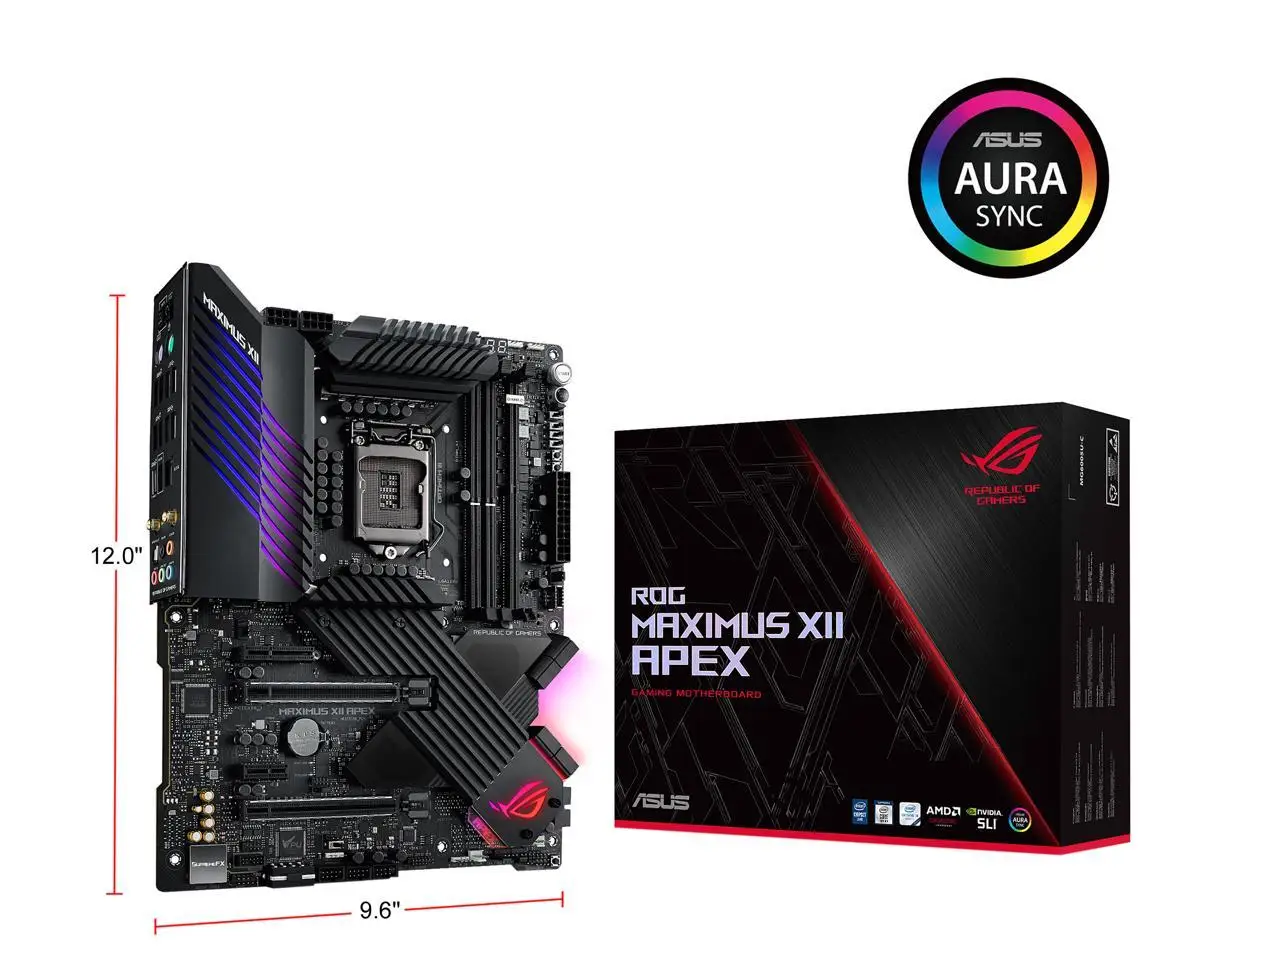 

For ASUS ROG MAXIMUS XII APEX WiFI 6 Computer Motherboard LGA 1200 DDR4 128G For Intel Z490 Desktop Mainboard M.2 PCI-E 3.0 X16